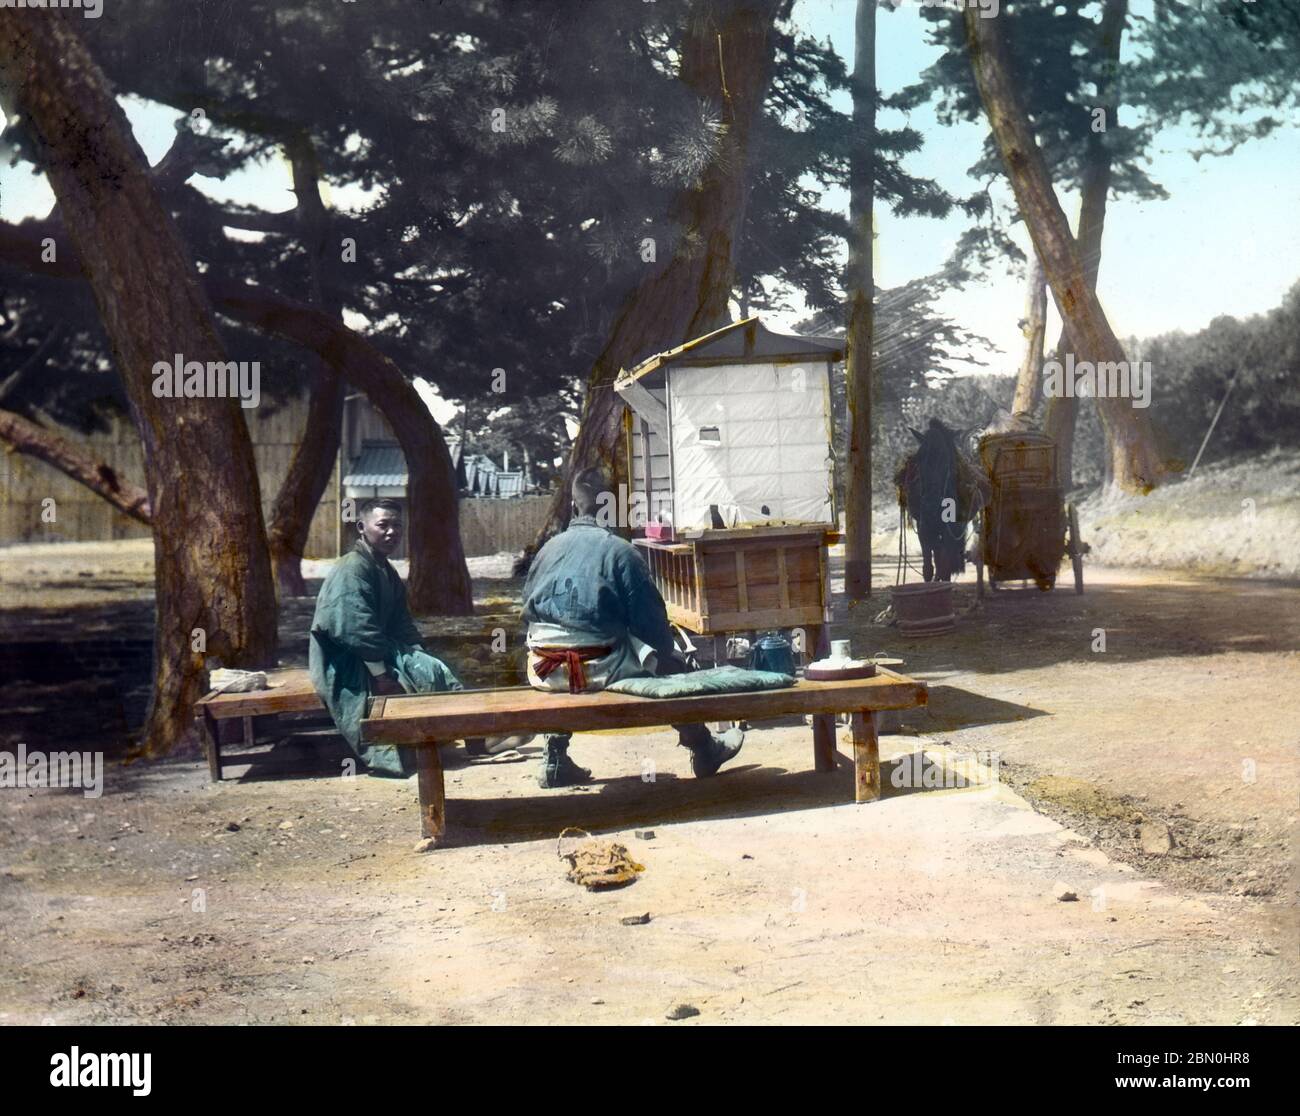 [ 1900s Japan - Japanese Road Side Tea Stand ] —   Two boys having tea at the wayside stand of a tea pedlar. A horse and cart can be seen in the back.  Japanese photographer Kozaburo Tamamura featured the same photograph in his book The Tea in Japan, published in 1908 (Meiji 41), conveniently dating this photograph to before this date.  19th century vintage glass slide. Stock Photo